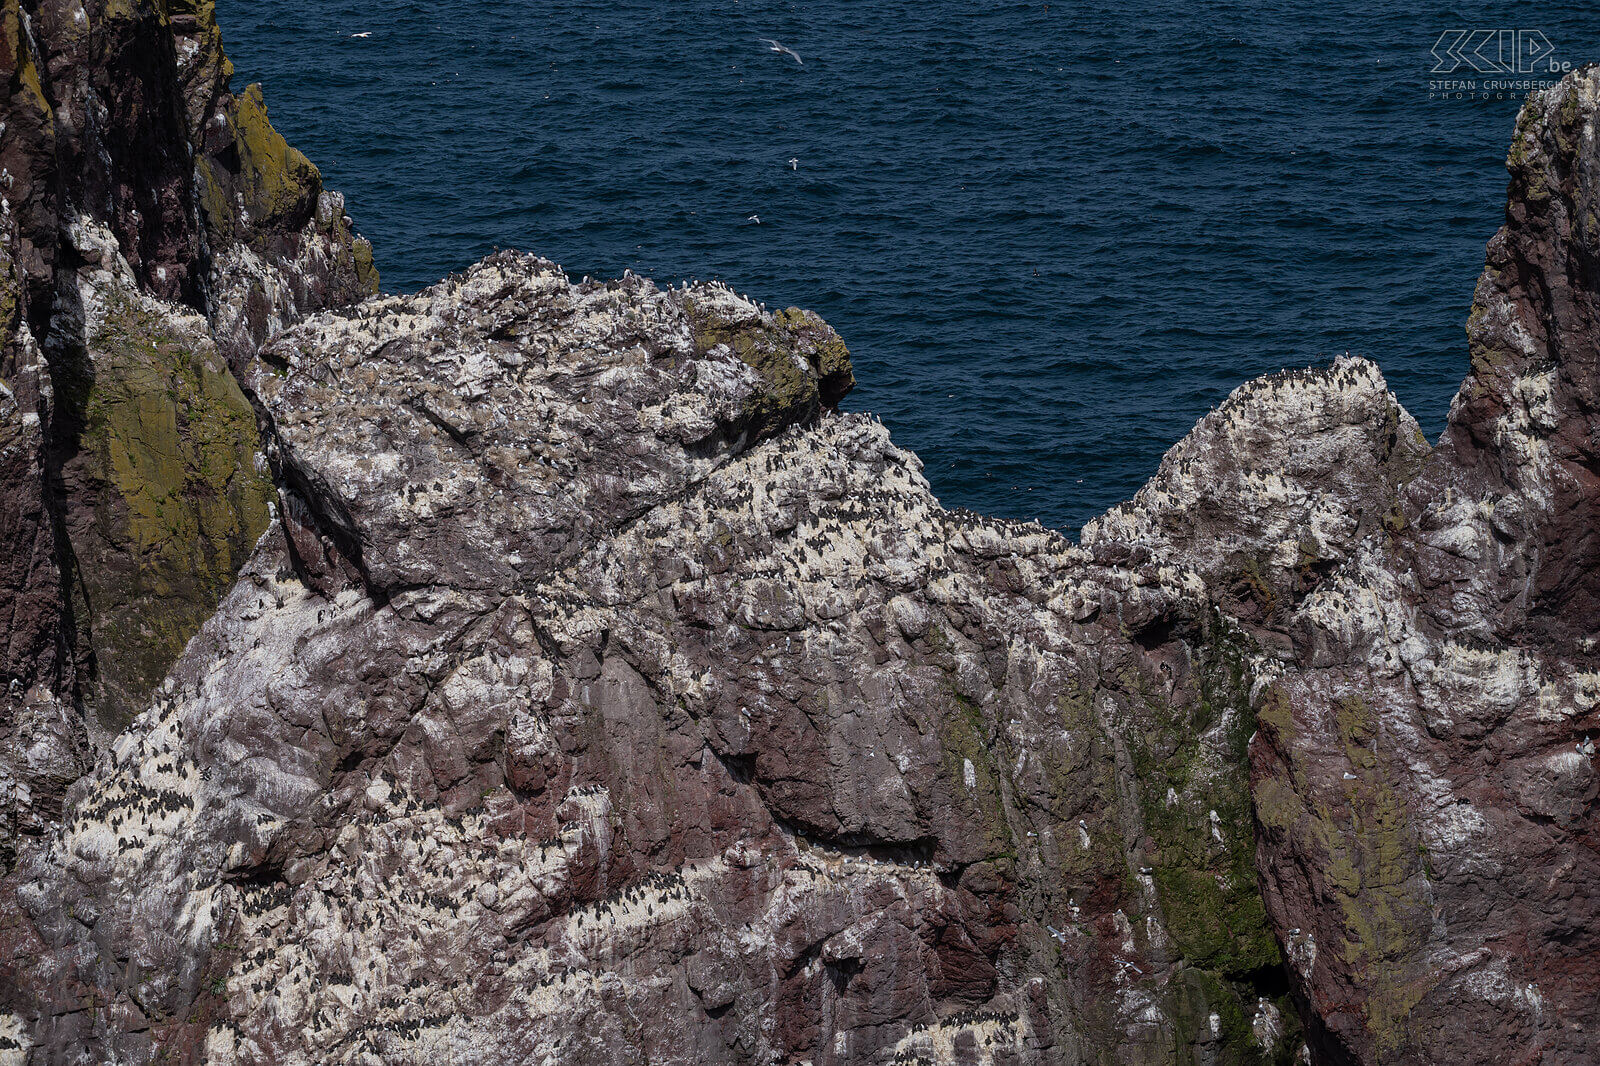 St Abbs Head - Guillemots St Abb's Head is a beautiful nature reserve and one of Britain's most accessible seabird colonies and is home to large numbers of guillemots, kittiwakes and razorbills. Stefan Cruysberghs